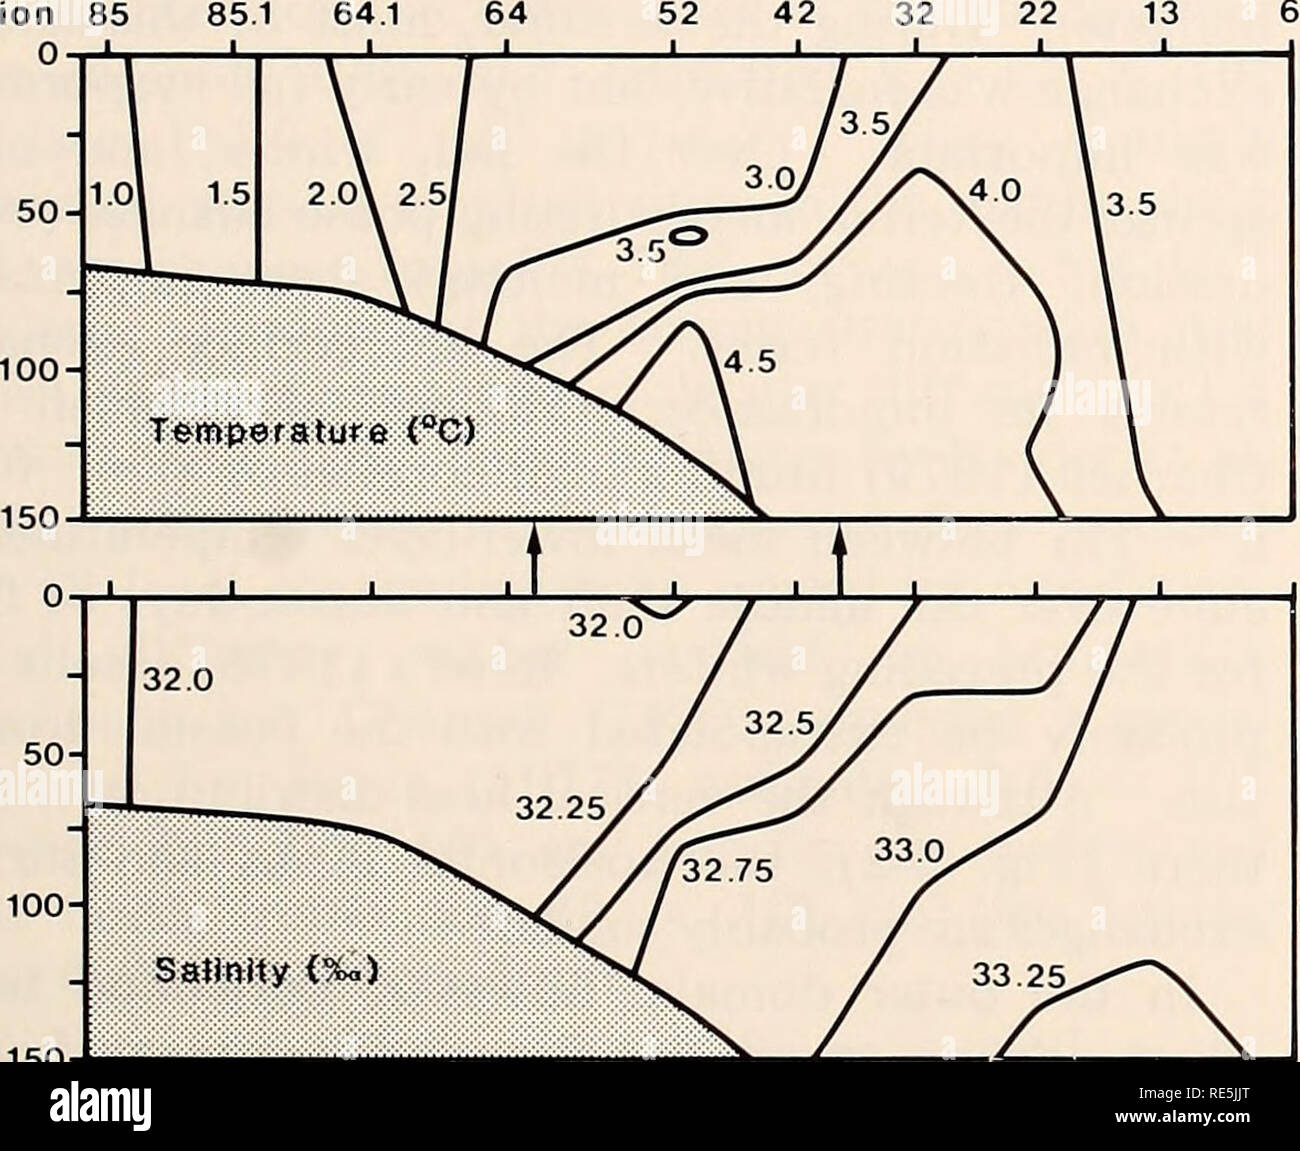 . The Eastern Bering Sea Shelf : oceanography and resources / edited by Donald W. Hood and John A. Calder. Oceanography Bering Sea.. Hydrographic structure 43 and therefore denser) water from the oceanic domain intrudes beneath cooler and fresher shelf water, thus maintaining stratification. Elsewhere, low-salinity water from melting ice may stratify water that was well mixed during autumn and winter (by wind stirring and surface cooling). A cross section taken from southeast of the Pribilofs toward Cape Newenham in February 1978 (Fig. 4-9) illustrated intrusion of the basin water. Between the Stock Photo